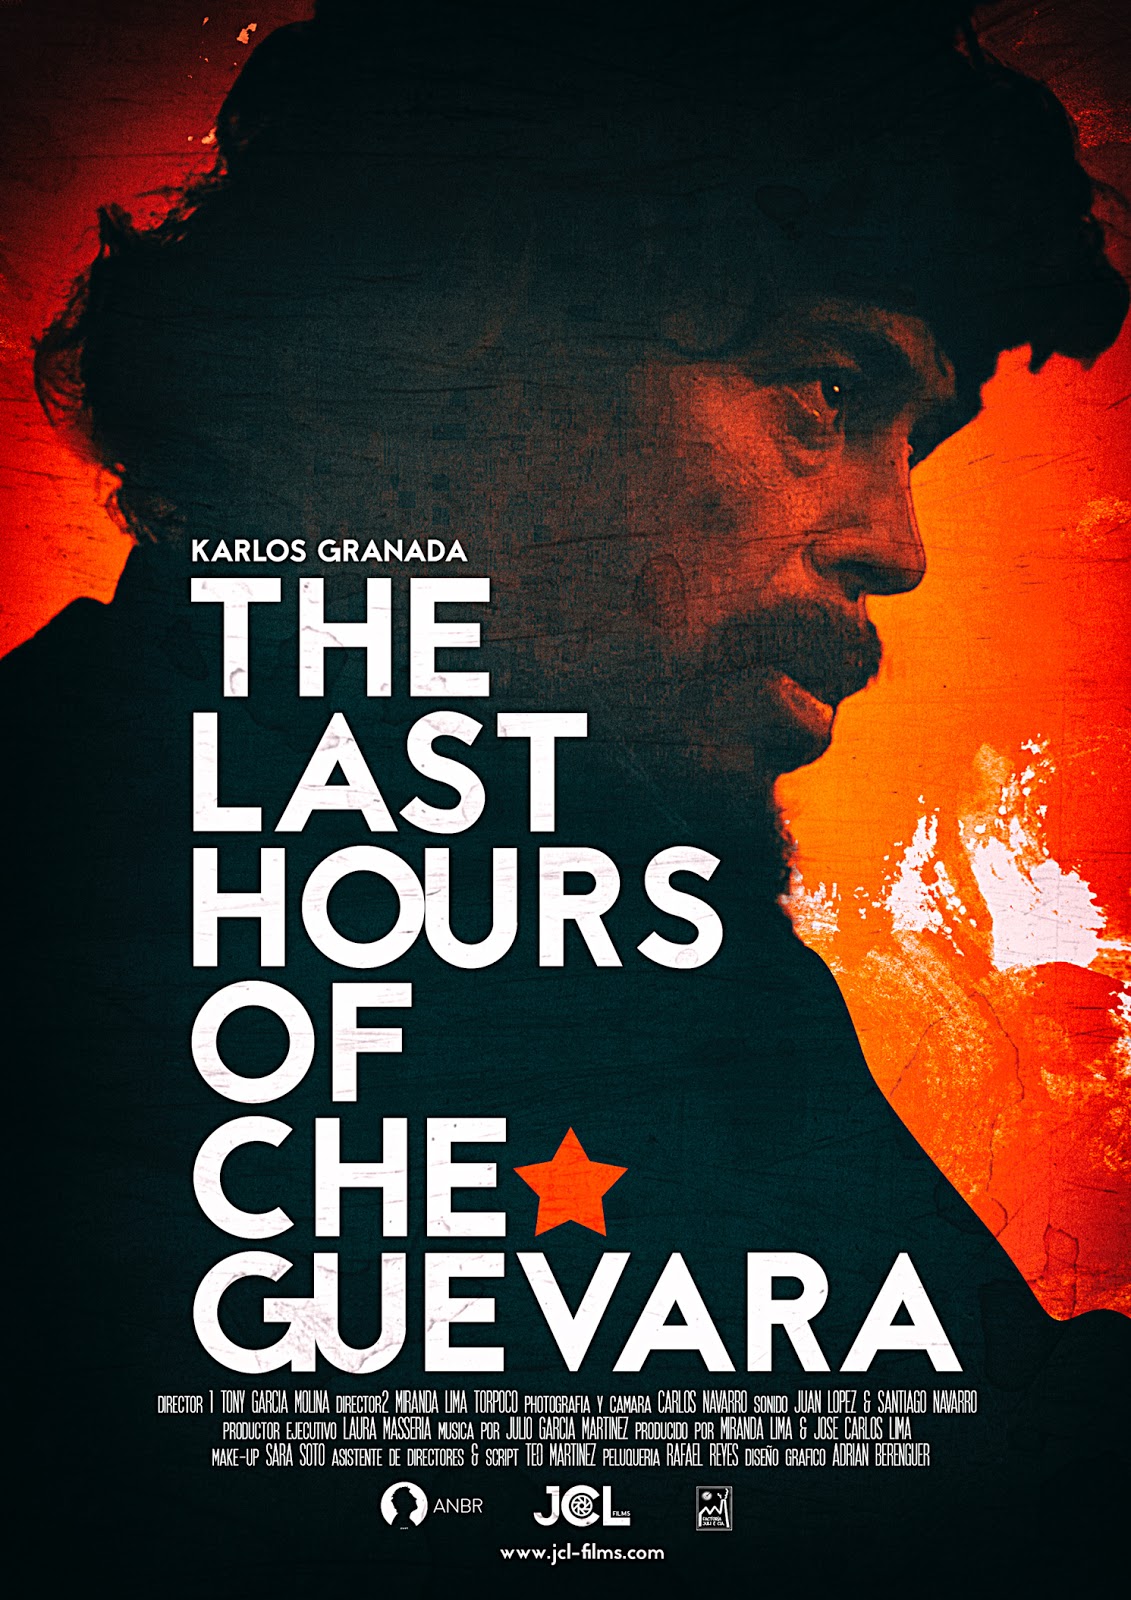 The last hours of Che Guevara